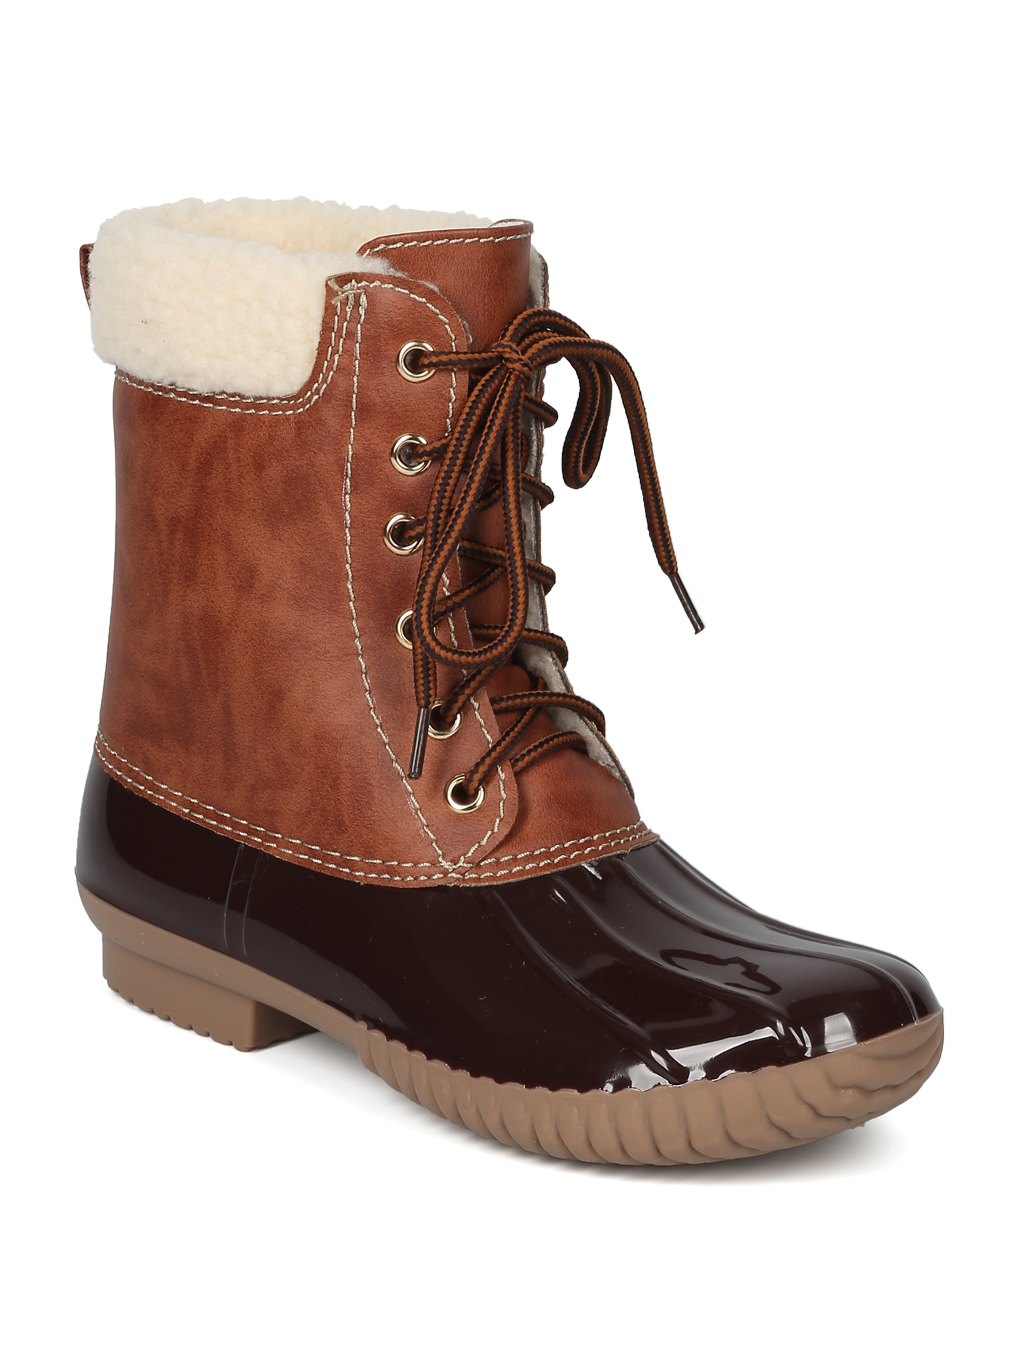 New Women Two Tone Faux Shearling Lined Lace Up Duck Boot - 17990 By Yoki - image 1 of 6